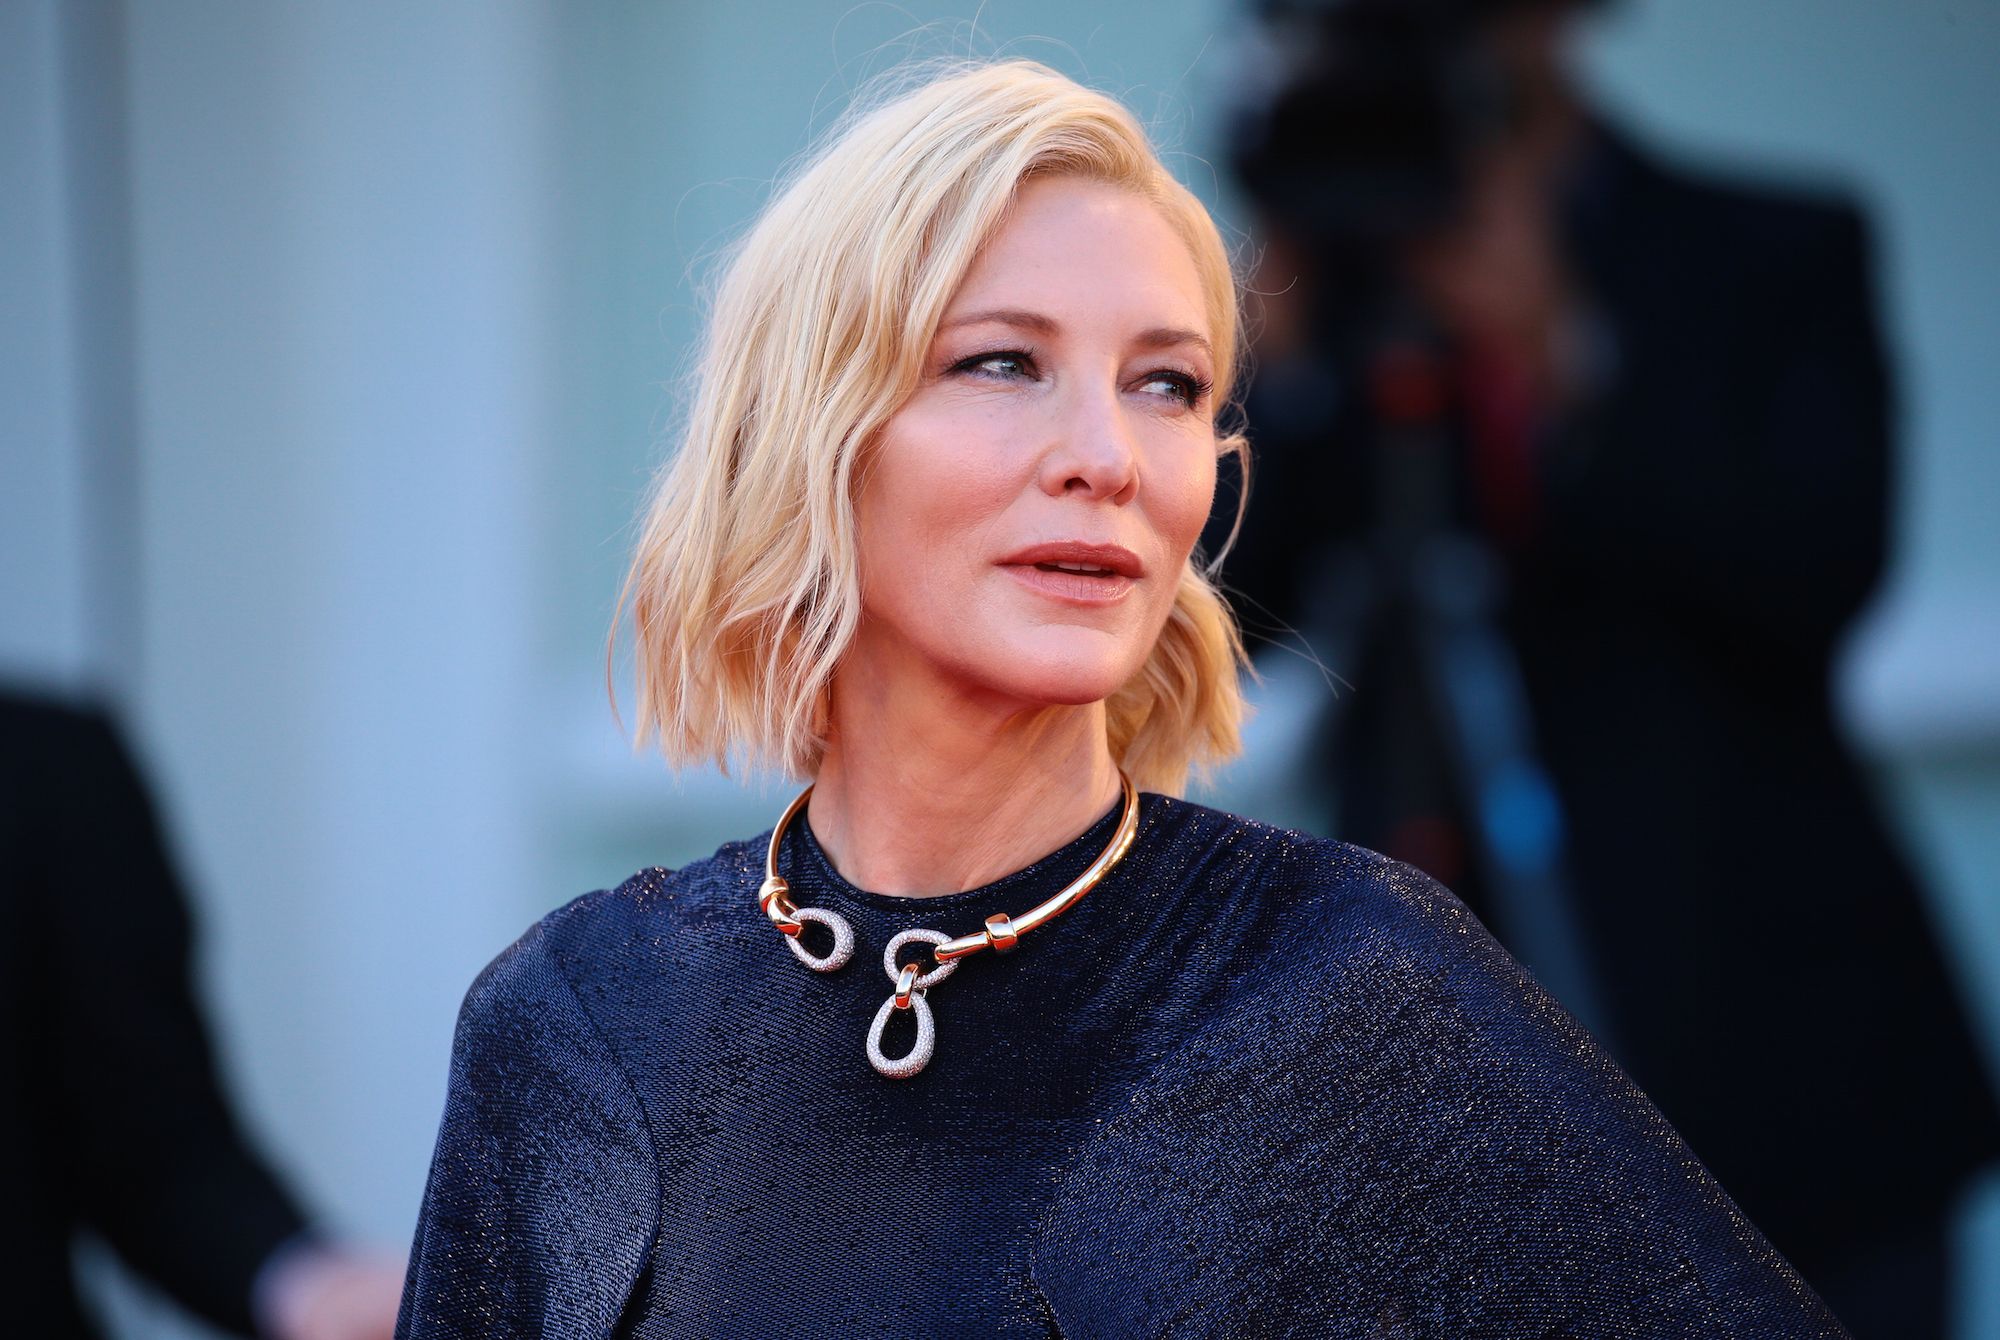 cate blanchett poses on the red carpet during the 77th venice film festival on september 02, 2020 in venice, italy  photo by matteo chinellatonurphoto via getty images